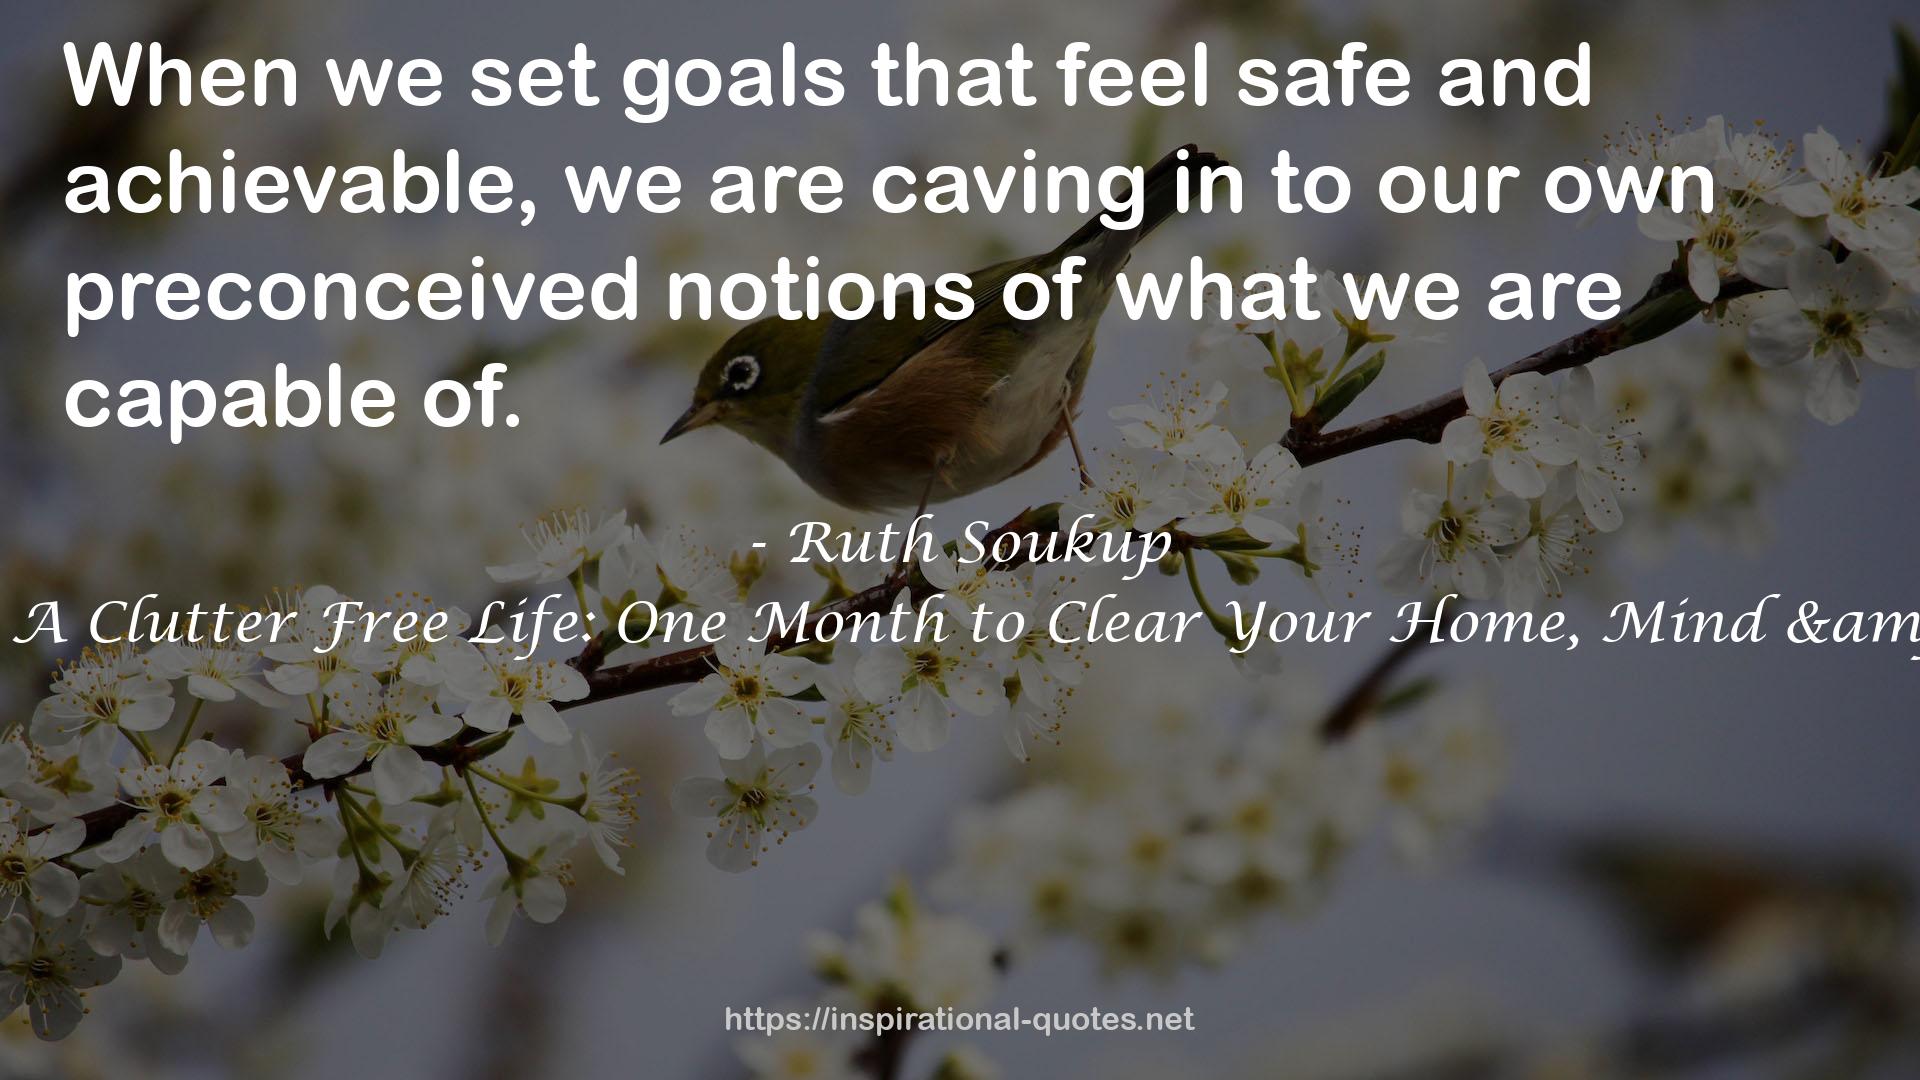 31 Days To A Clutter Free Life: One Month to Clear Your Home, Mind & Schedule QUOTES